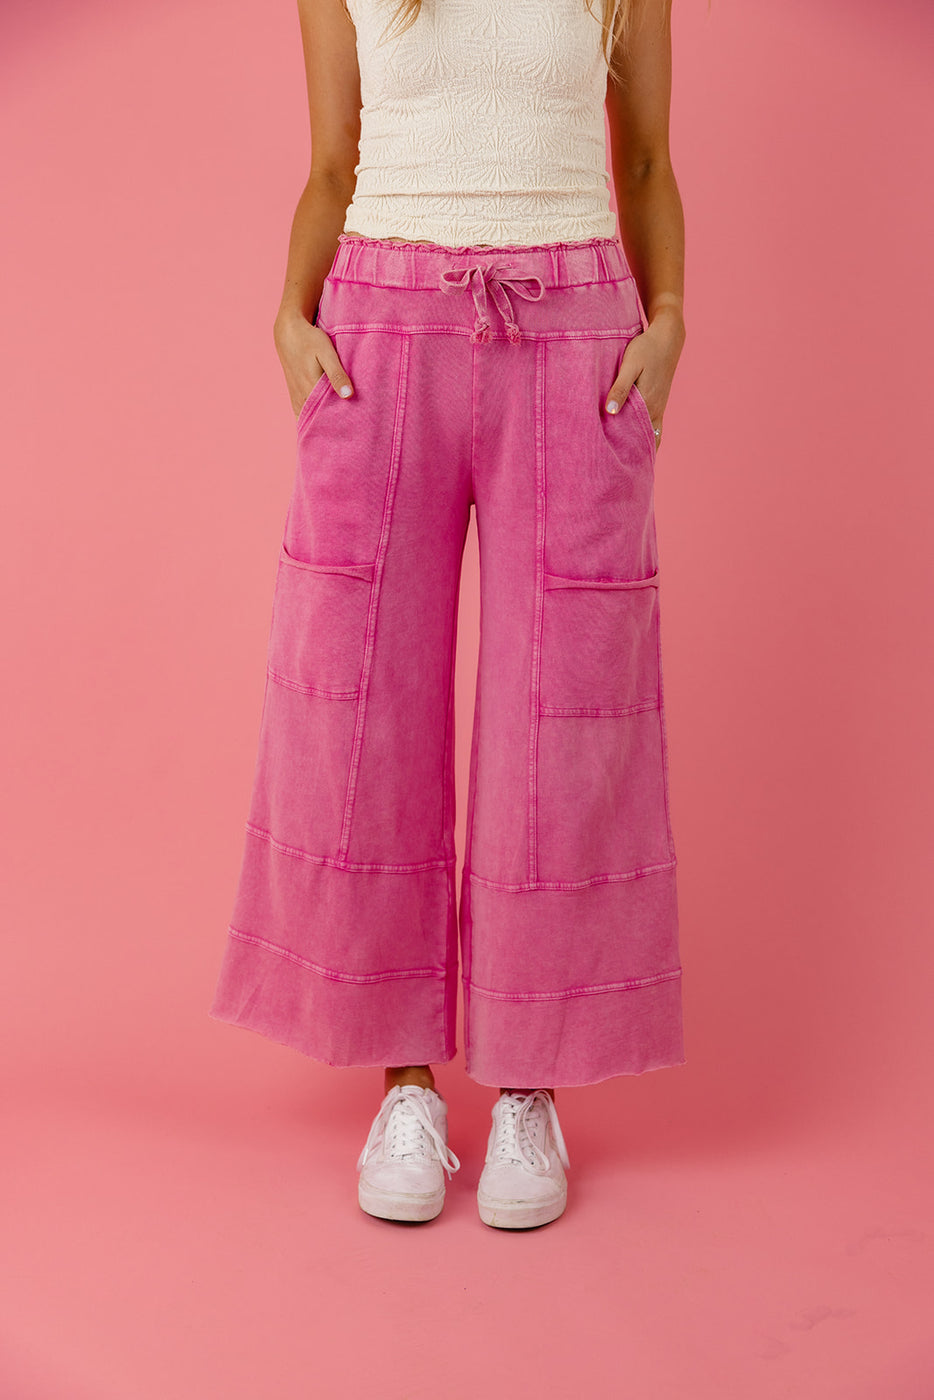 a person wearing pink pants